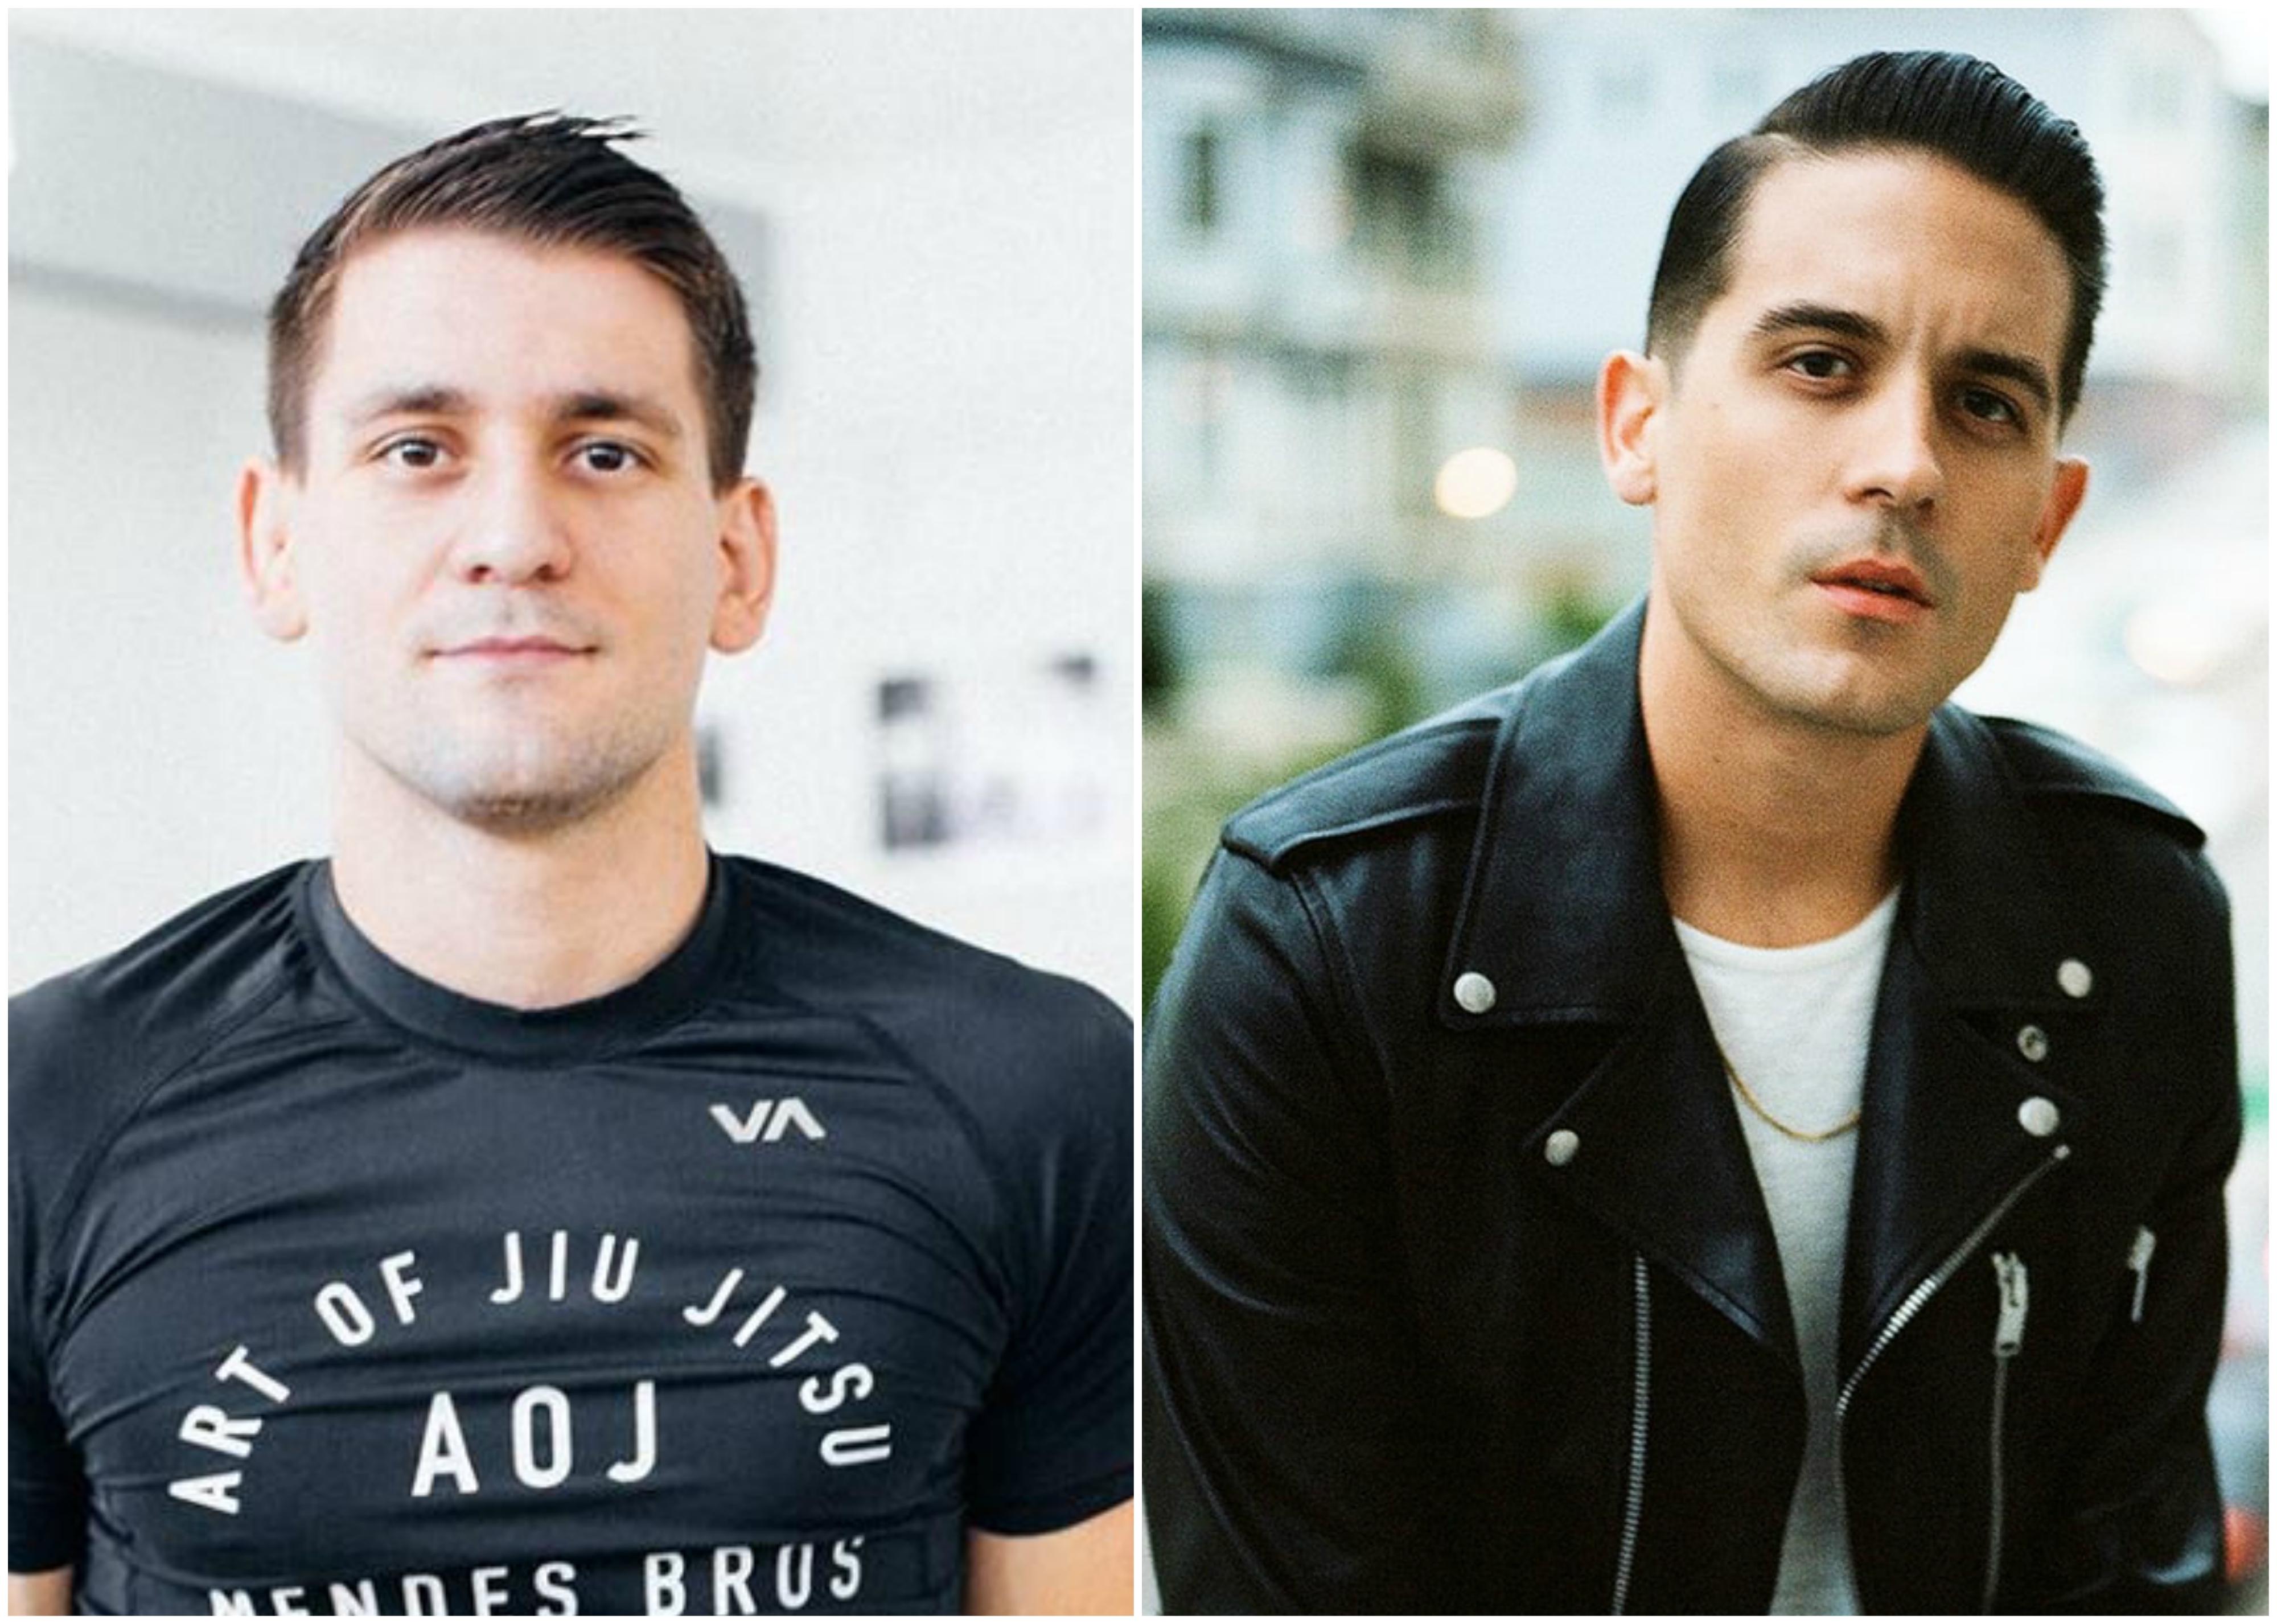 G-Eazy style: He is channelling The Matrix with ease